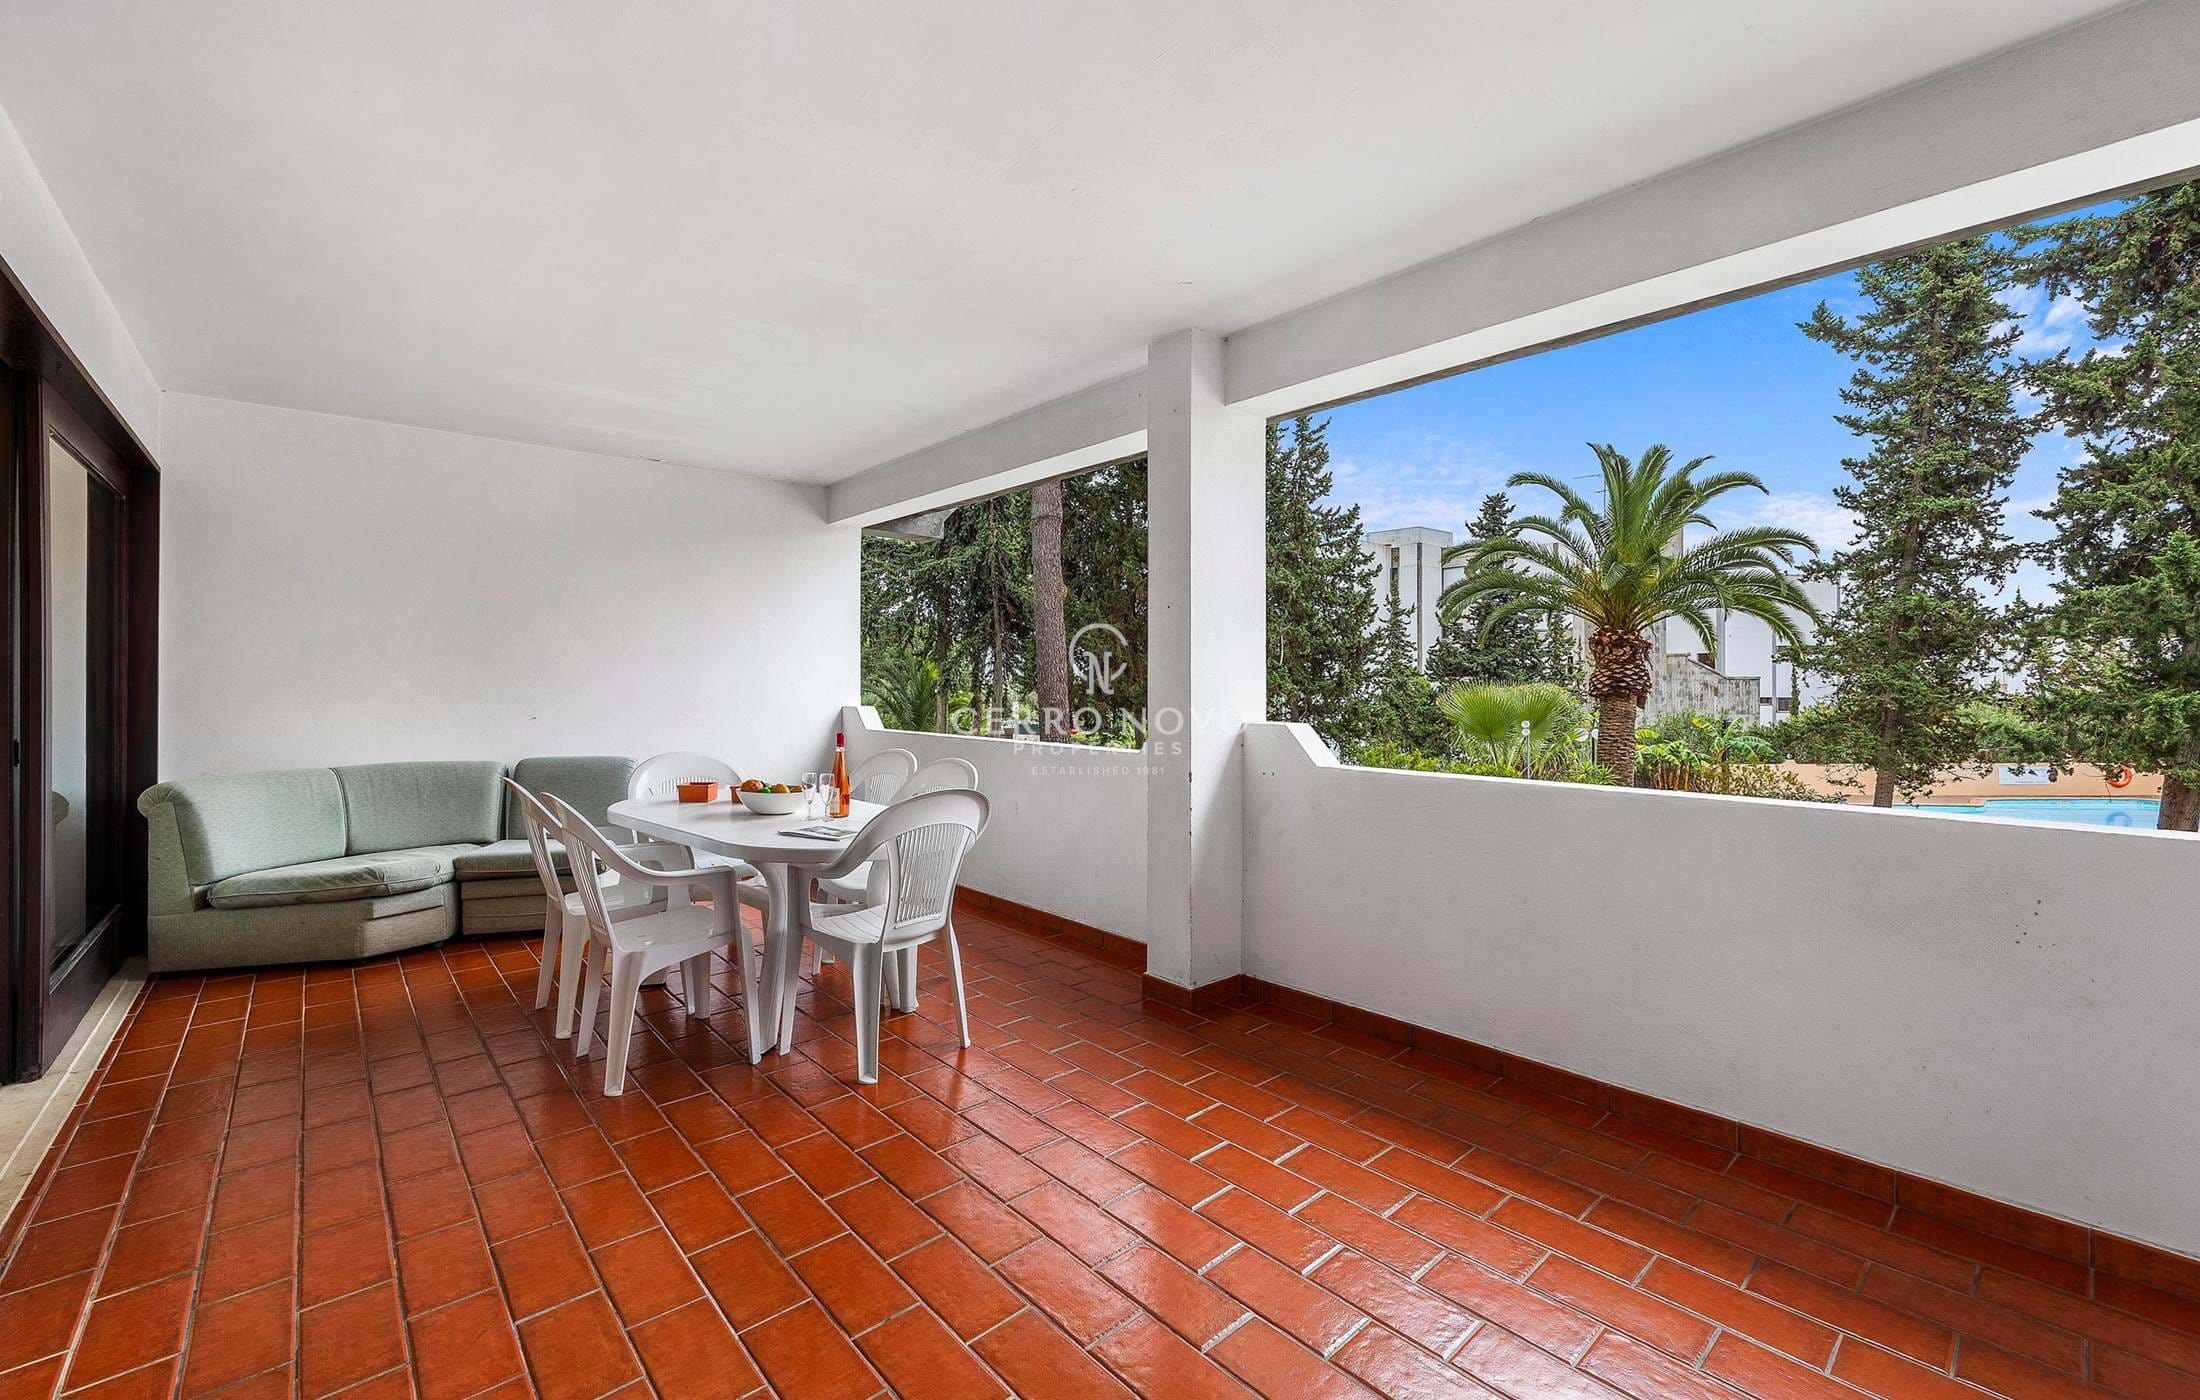 SOLD- Two plus one bedroom apartment  with large terrace only 350 meters from the beach